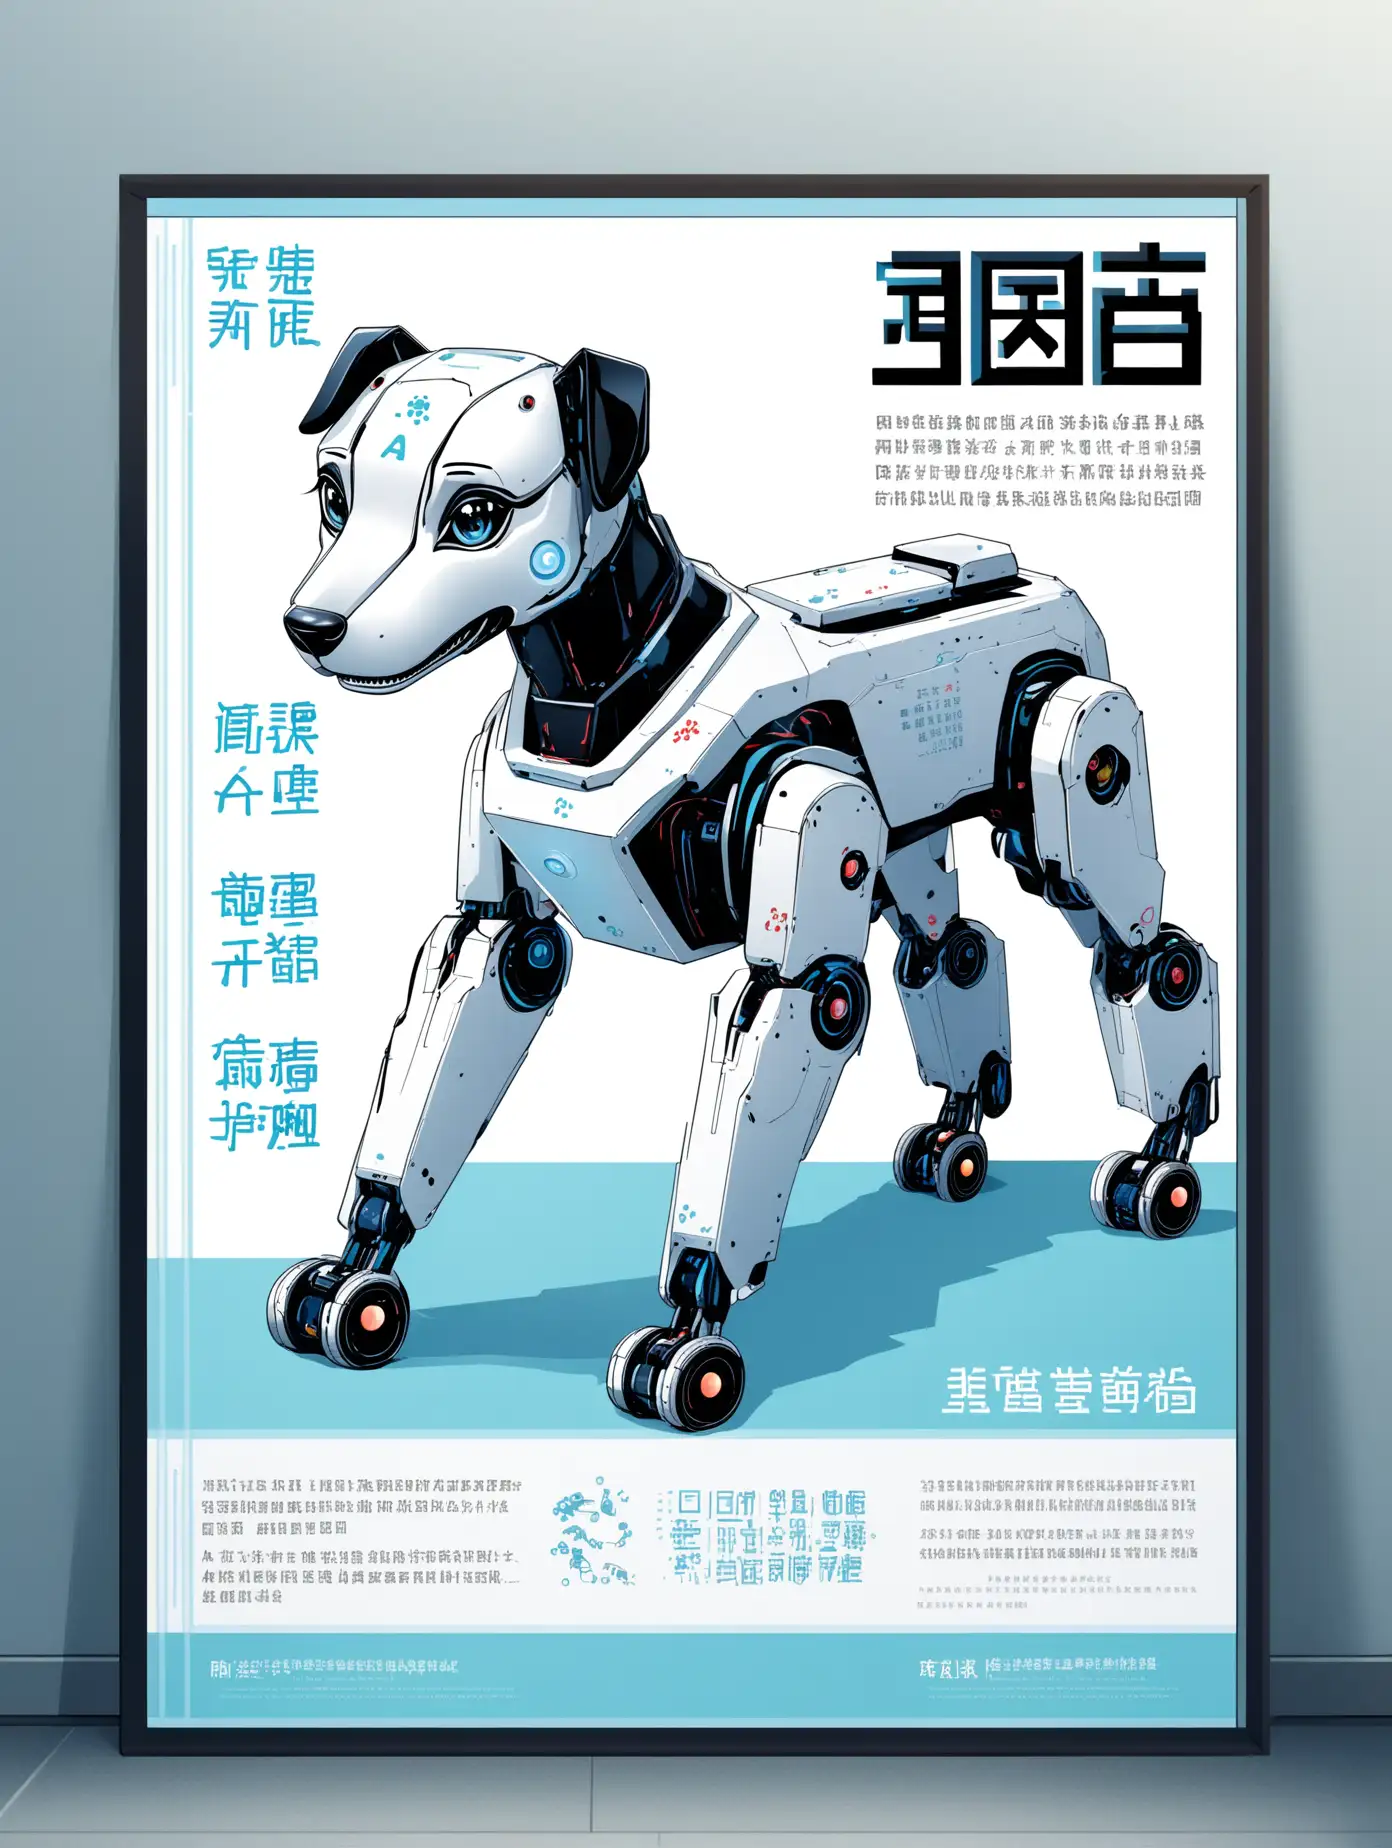 Design an engaging and educational poster featuring Chinese AI-powered robotic dogs, aimed at stimulating the interest of Chinese compulsory education students in artificial intelligence. The poster should convey the theme of AI and youth, and inspire a strong desire to learn about AI among students.